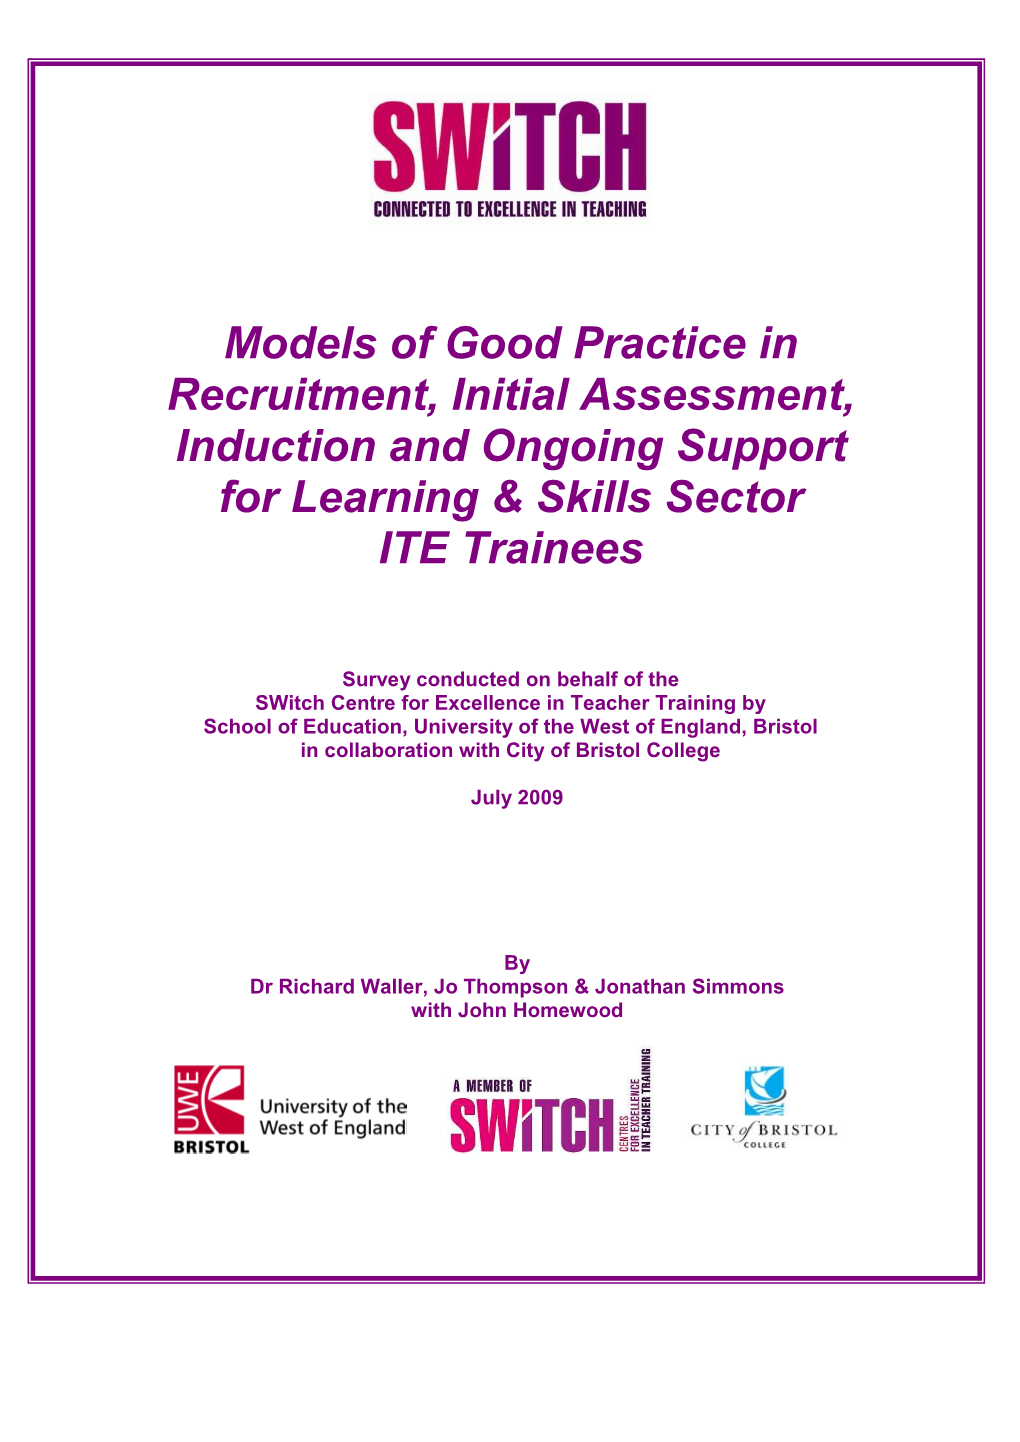 Models of Good Practice in Recruitment, Initial Assessment, Induction and Ongoing Support for ITE Trainees